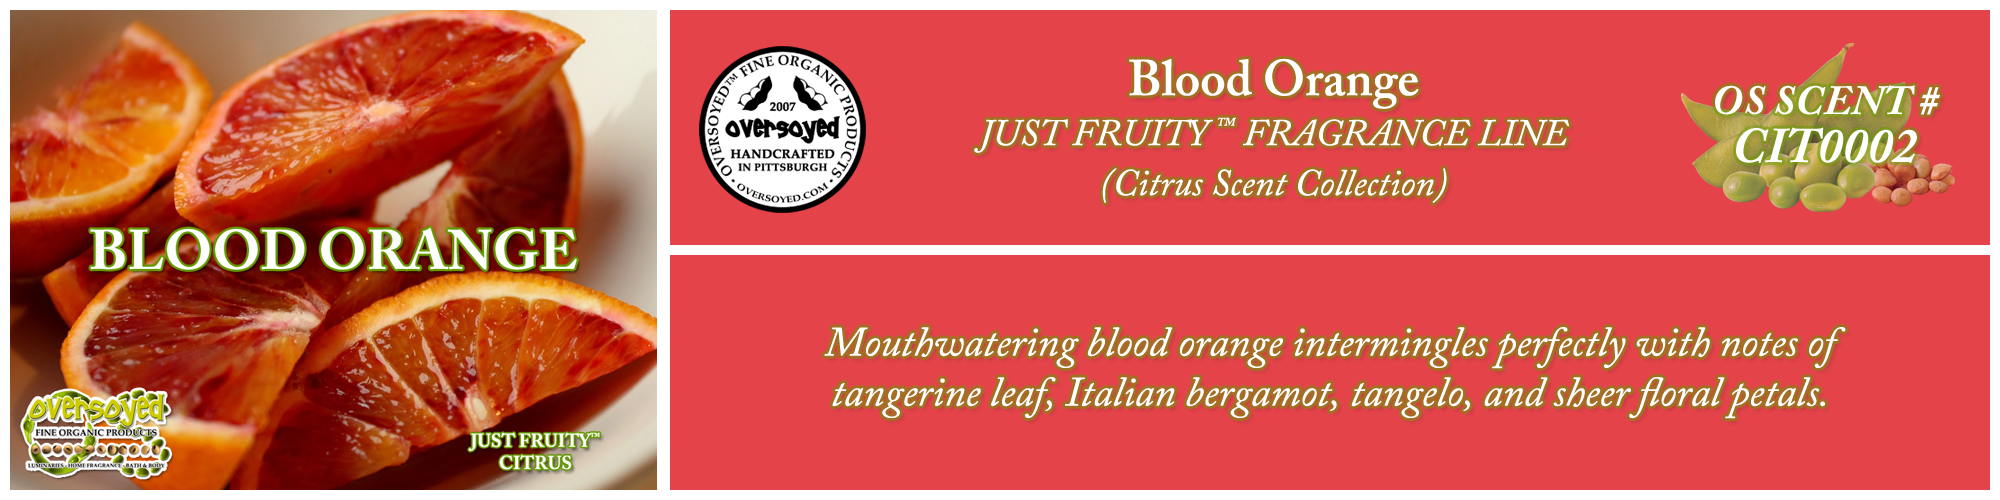 Blood Orange Handcrafted Products Collection